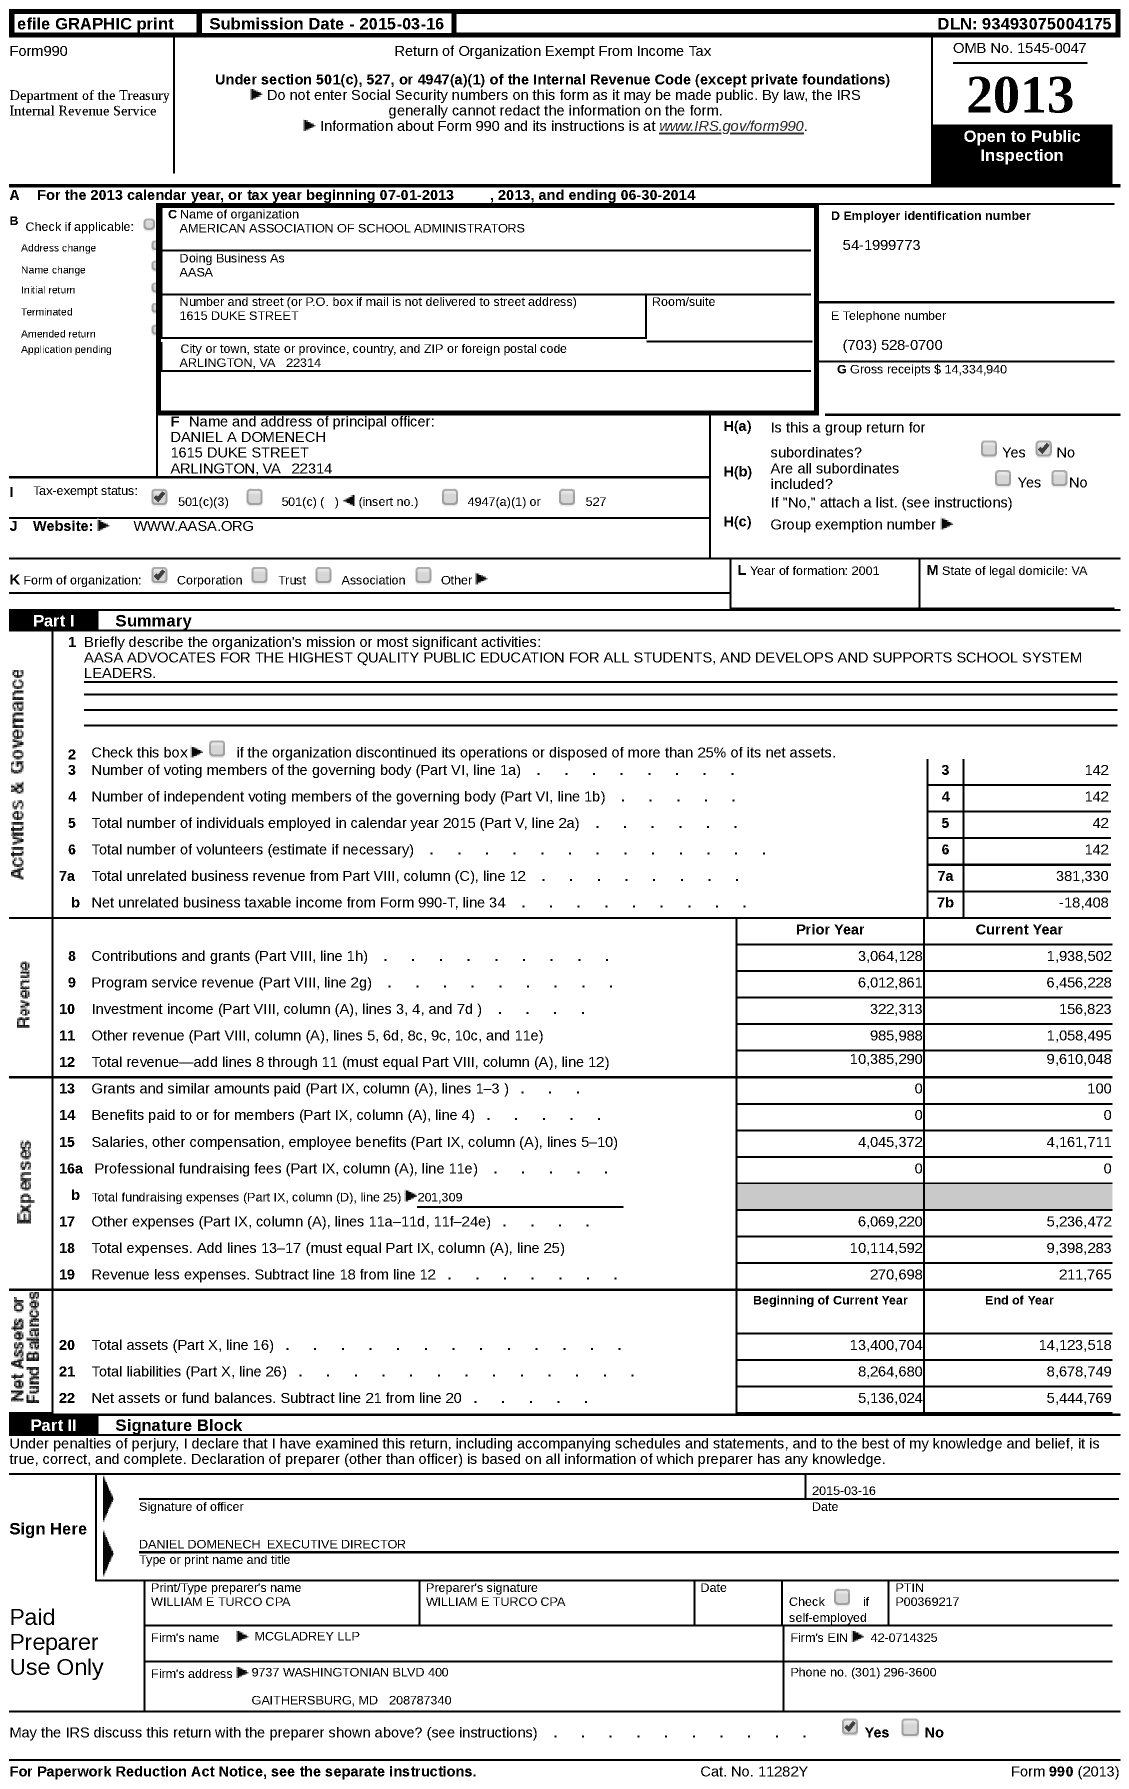 Image of first page of 2013 Form 990 for American Association of School Administrators (AASA)